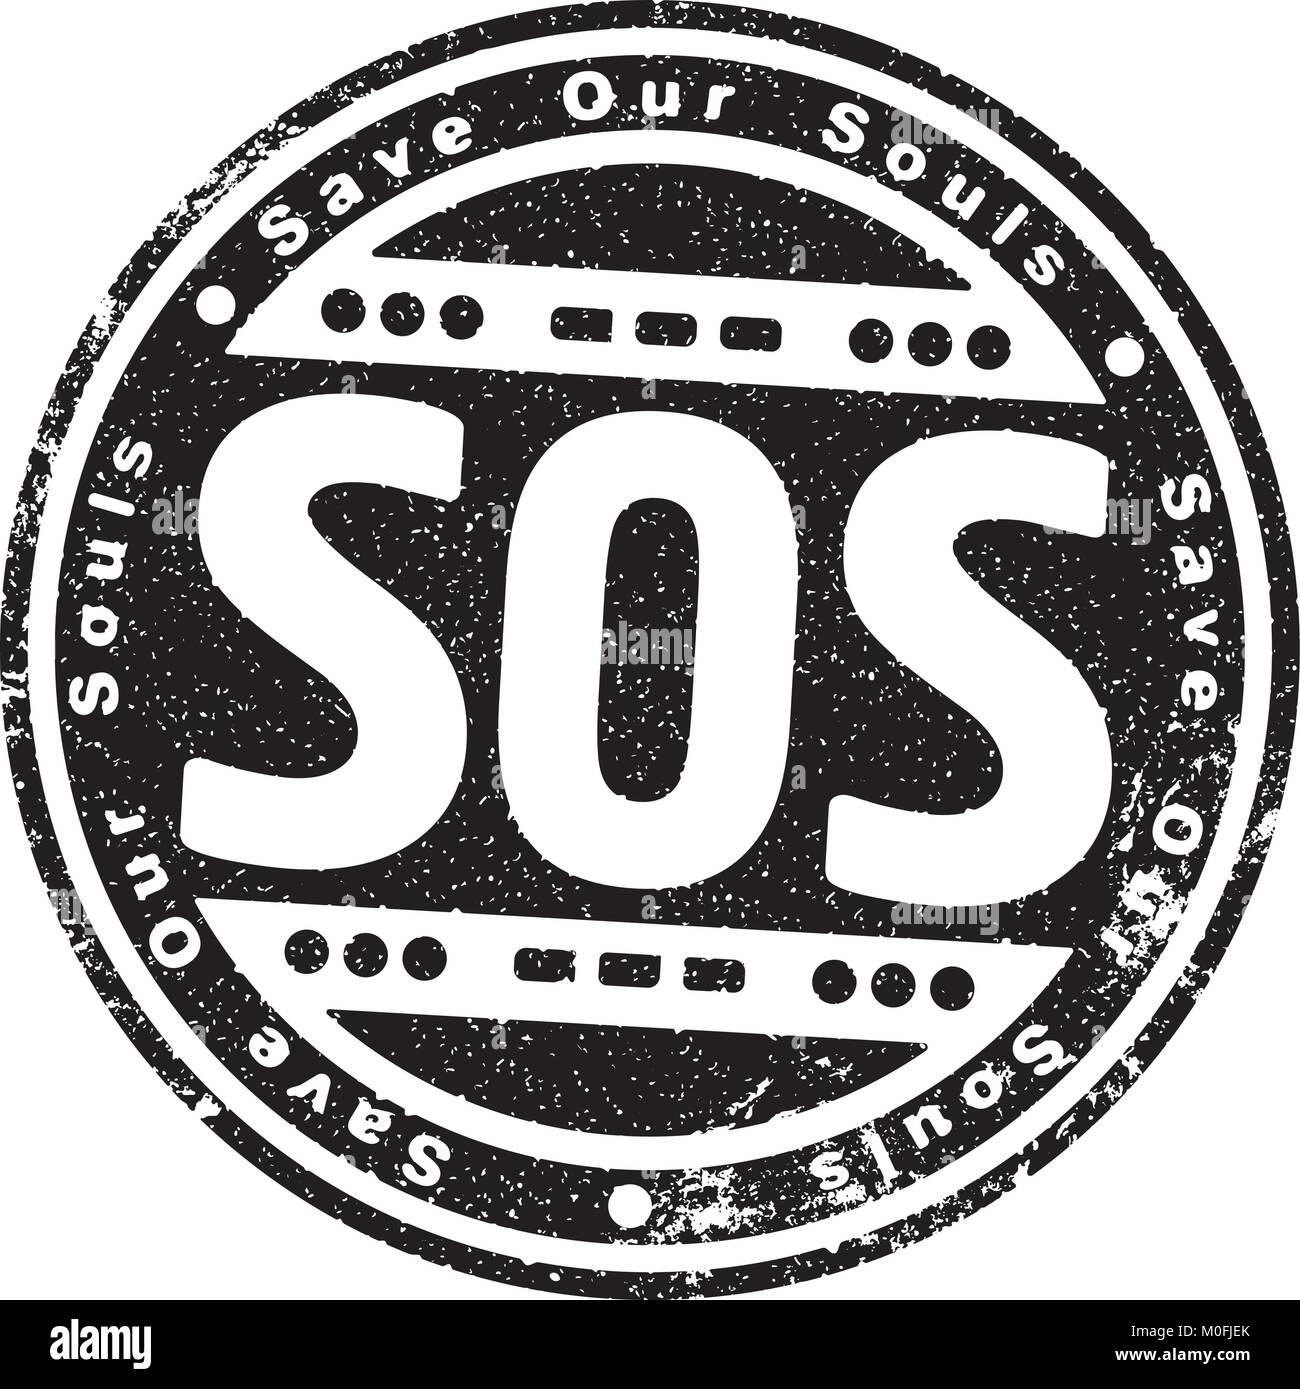 Rubber Stamp With The Words Sos Save Our Souls And Morse Code